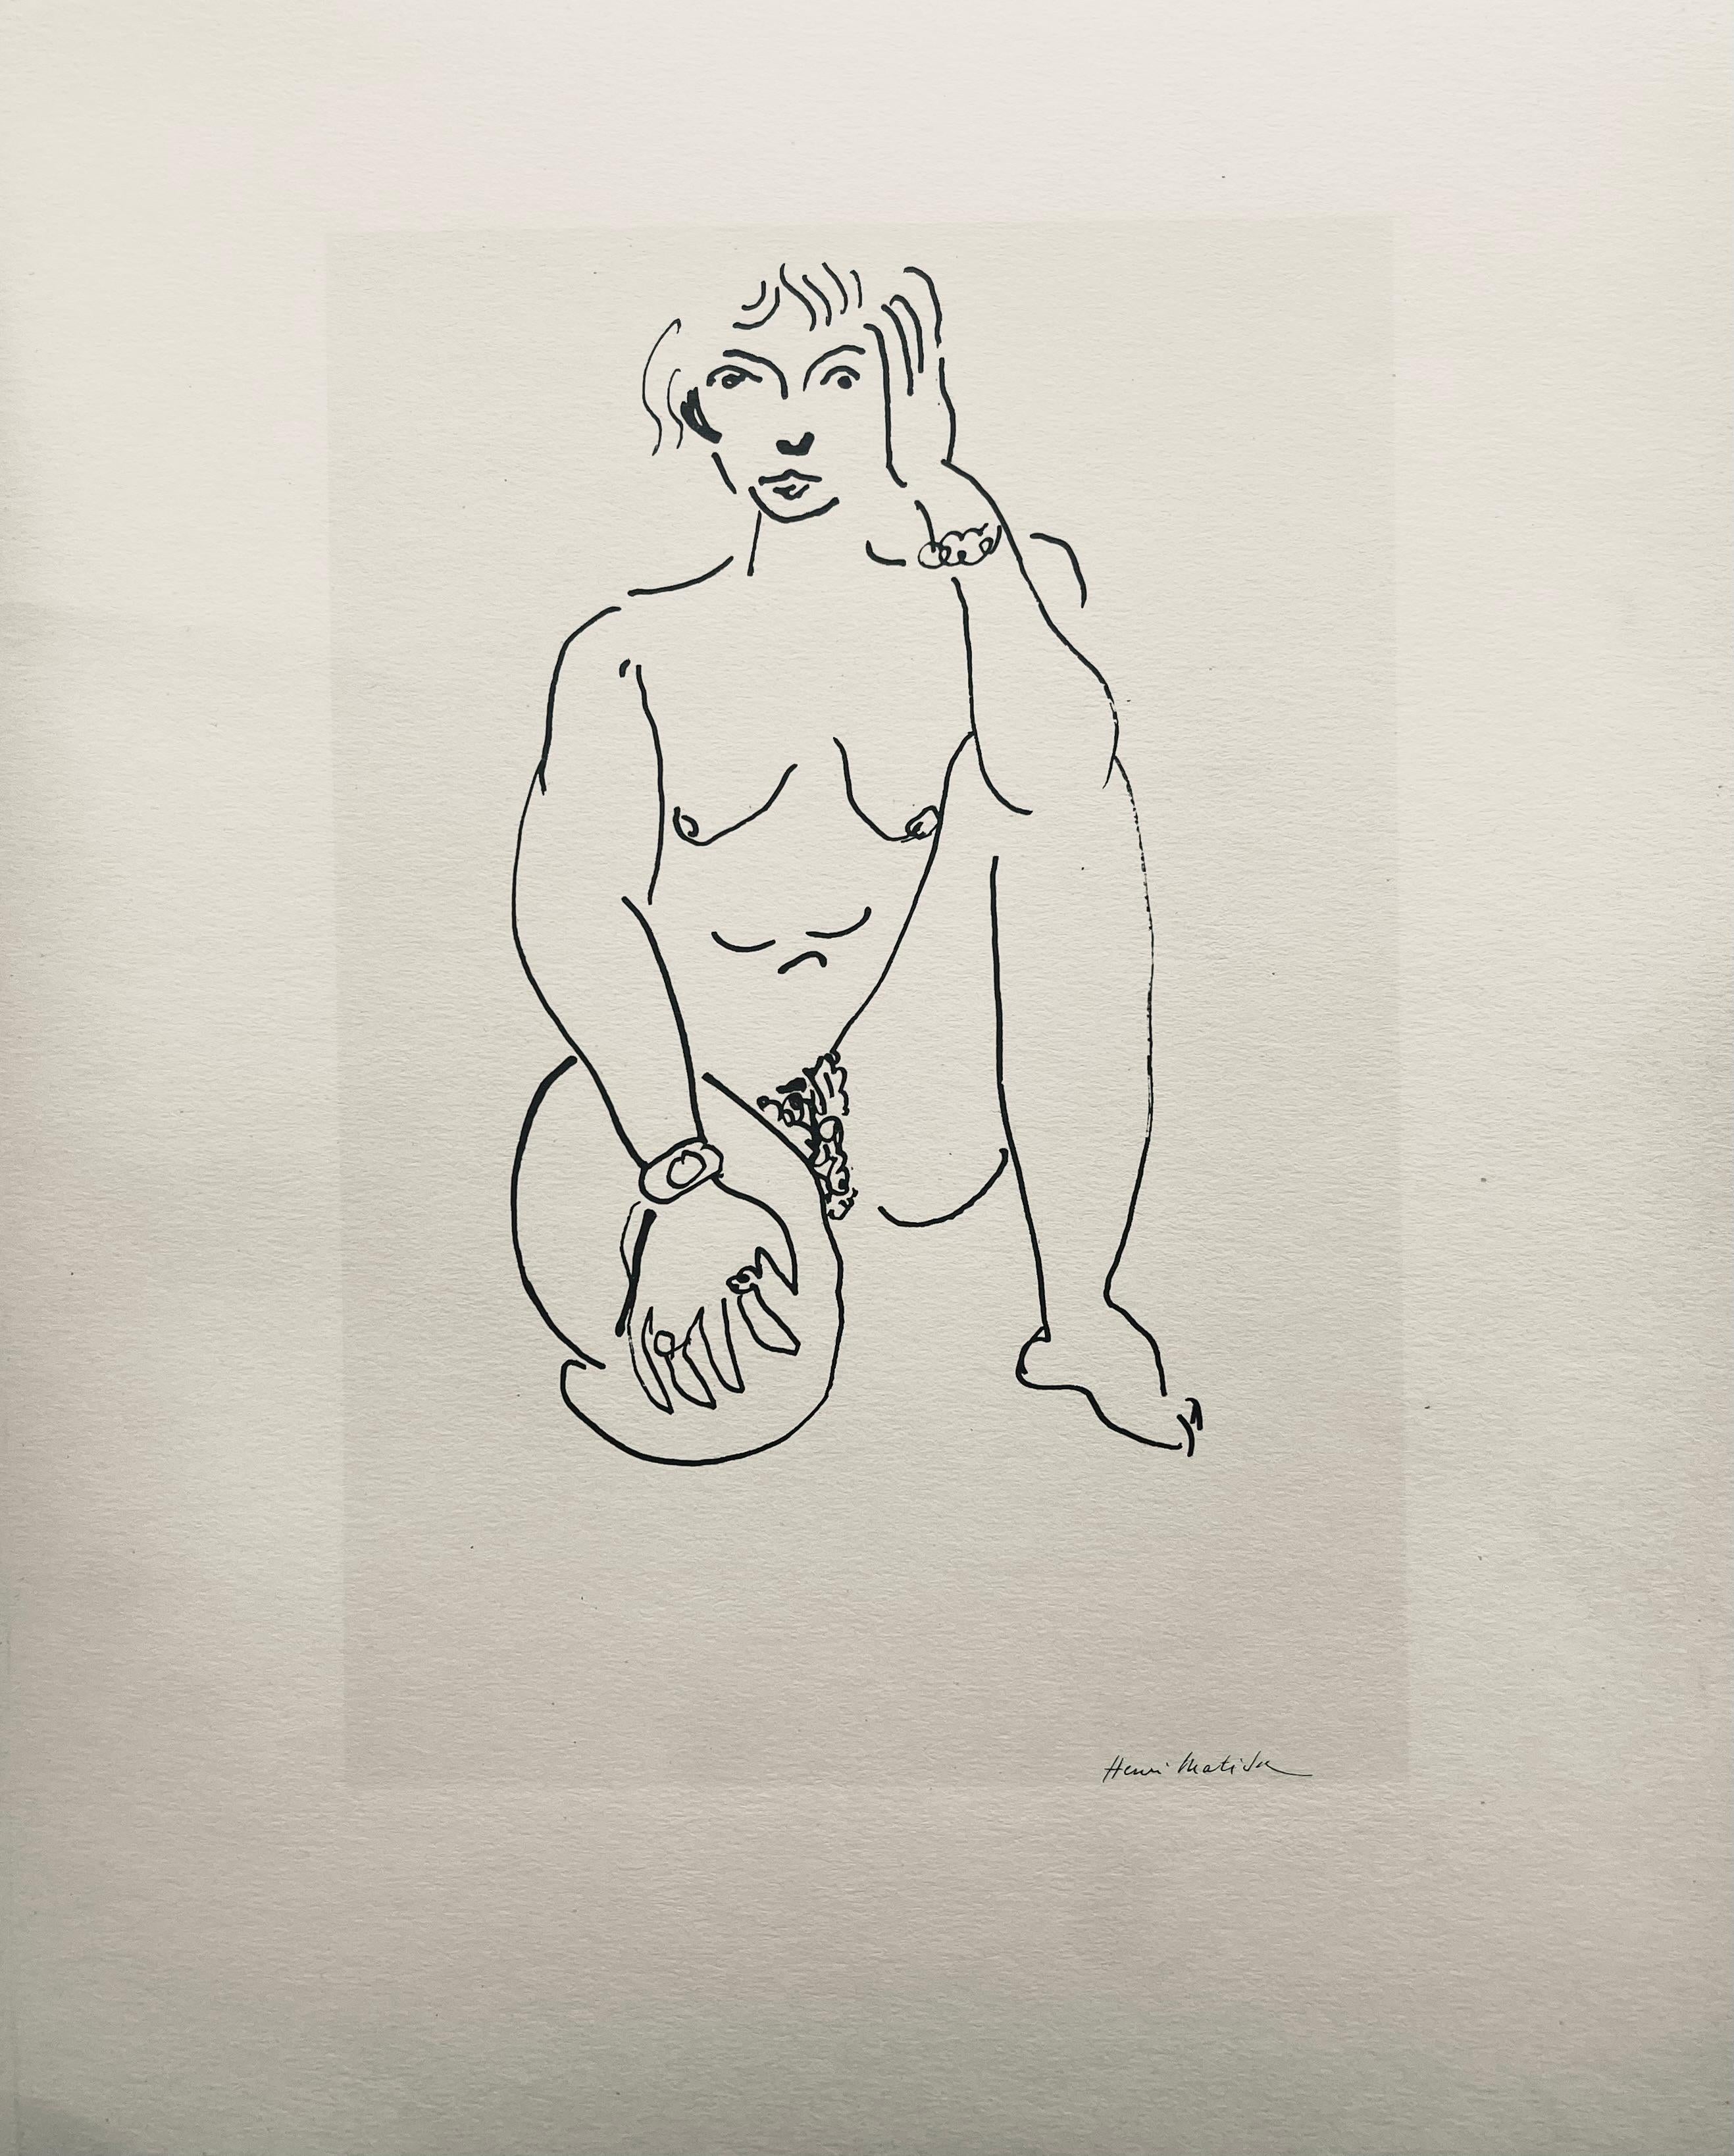 Lithograph on vélin Lafuma paper. Unsigned and unnumbered, as issued. Good Condition; never framed or matted. Notes: From the volume, Dessins de Henri-Matisse, 1925. Published by Éditions des Quatre Chemins, Paris; lithographic plates rendered by